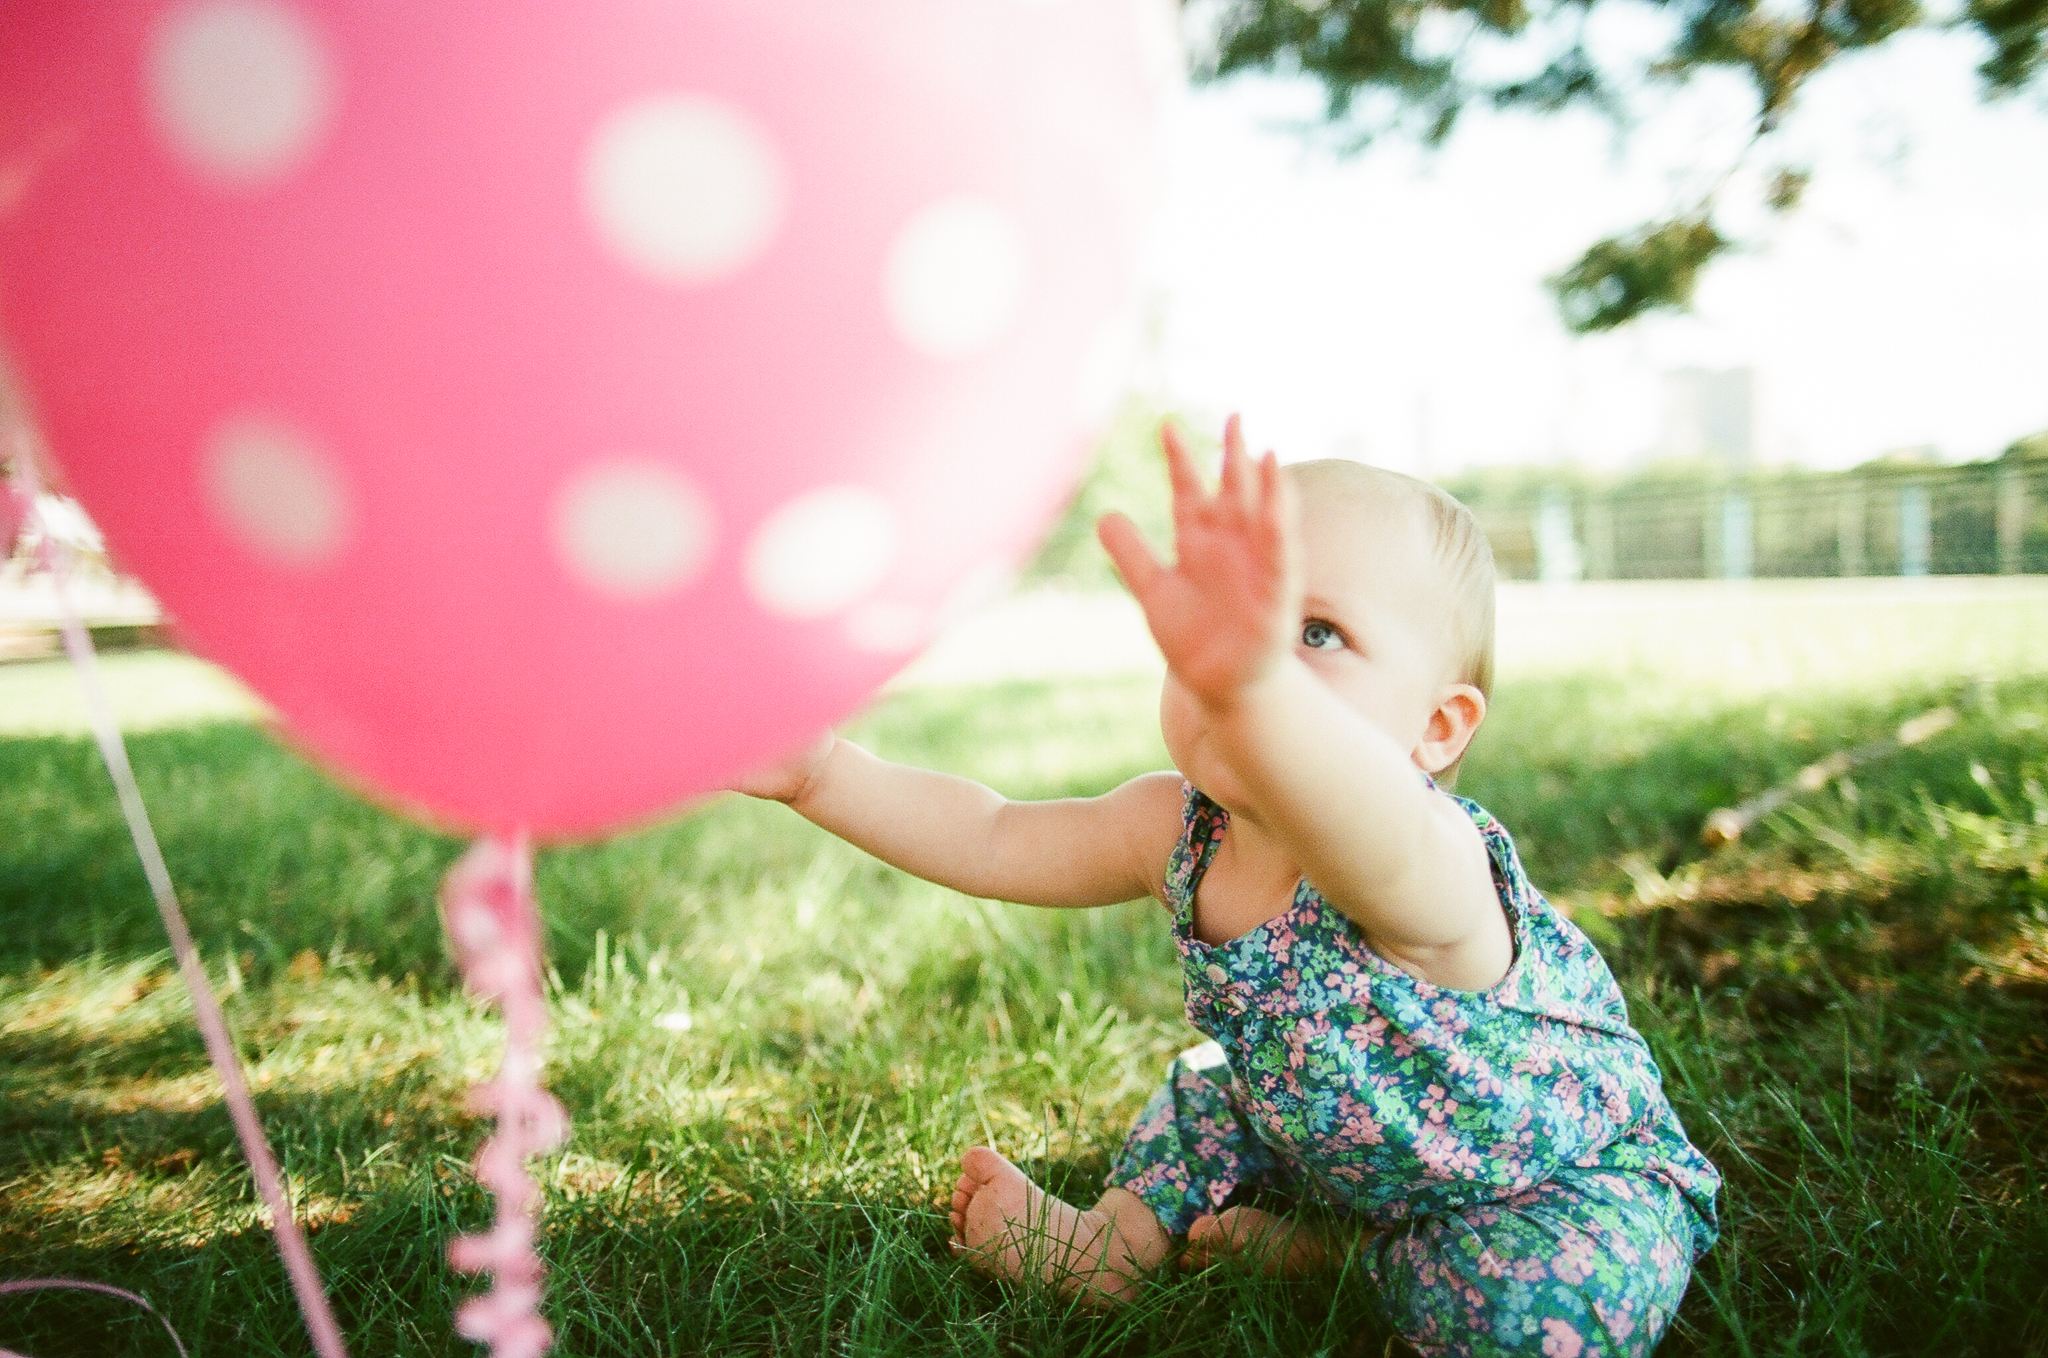 Child with Balloons on her first birthday